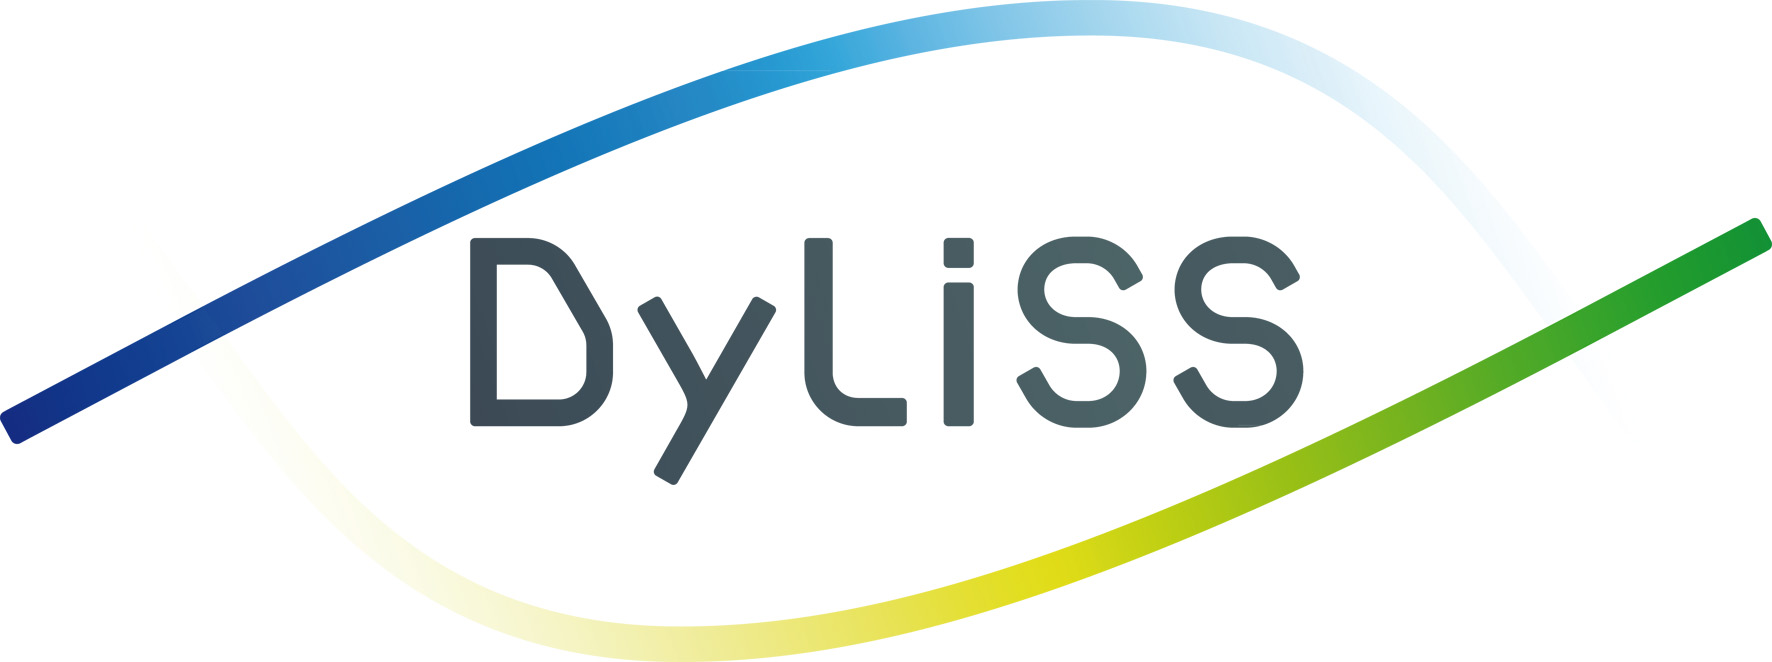 Dyliss Project team